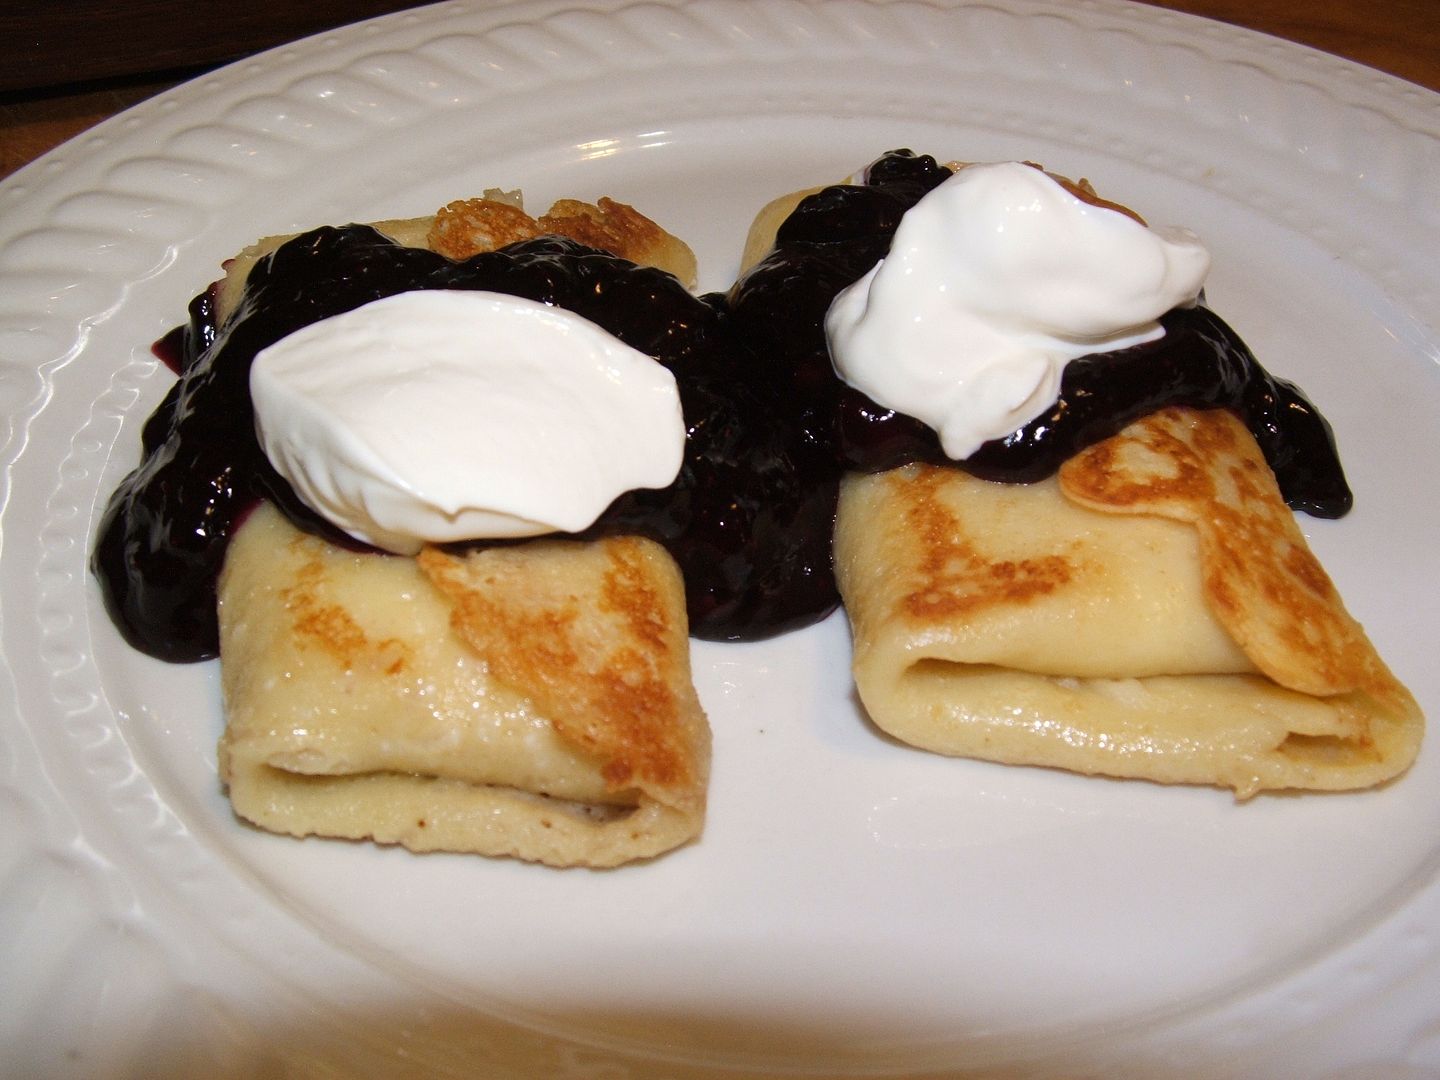 Bueberry Blintz, by Angie Ouellette-Tower for godsgrowinggarden.com